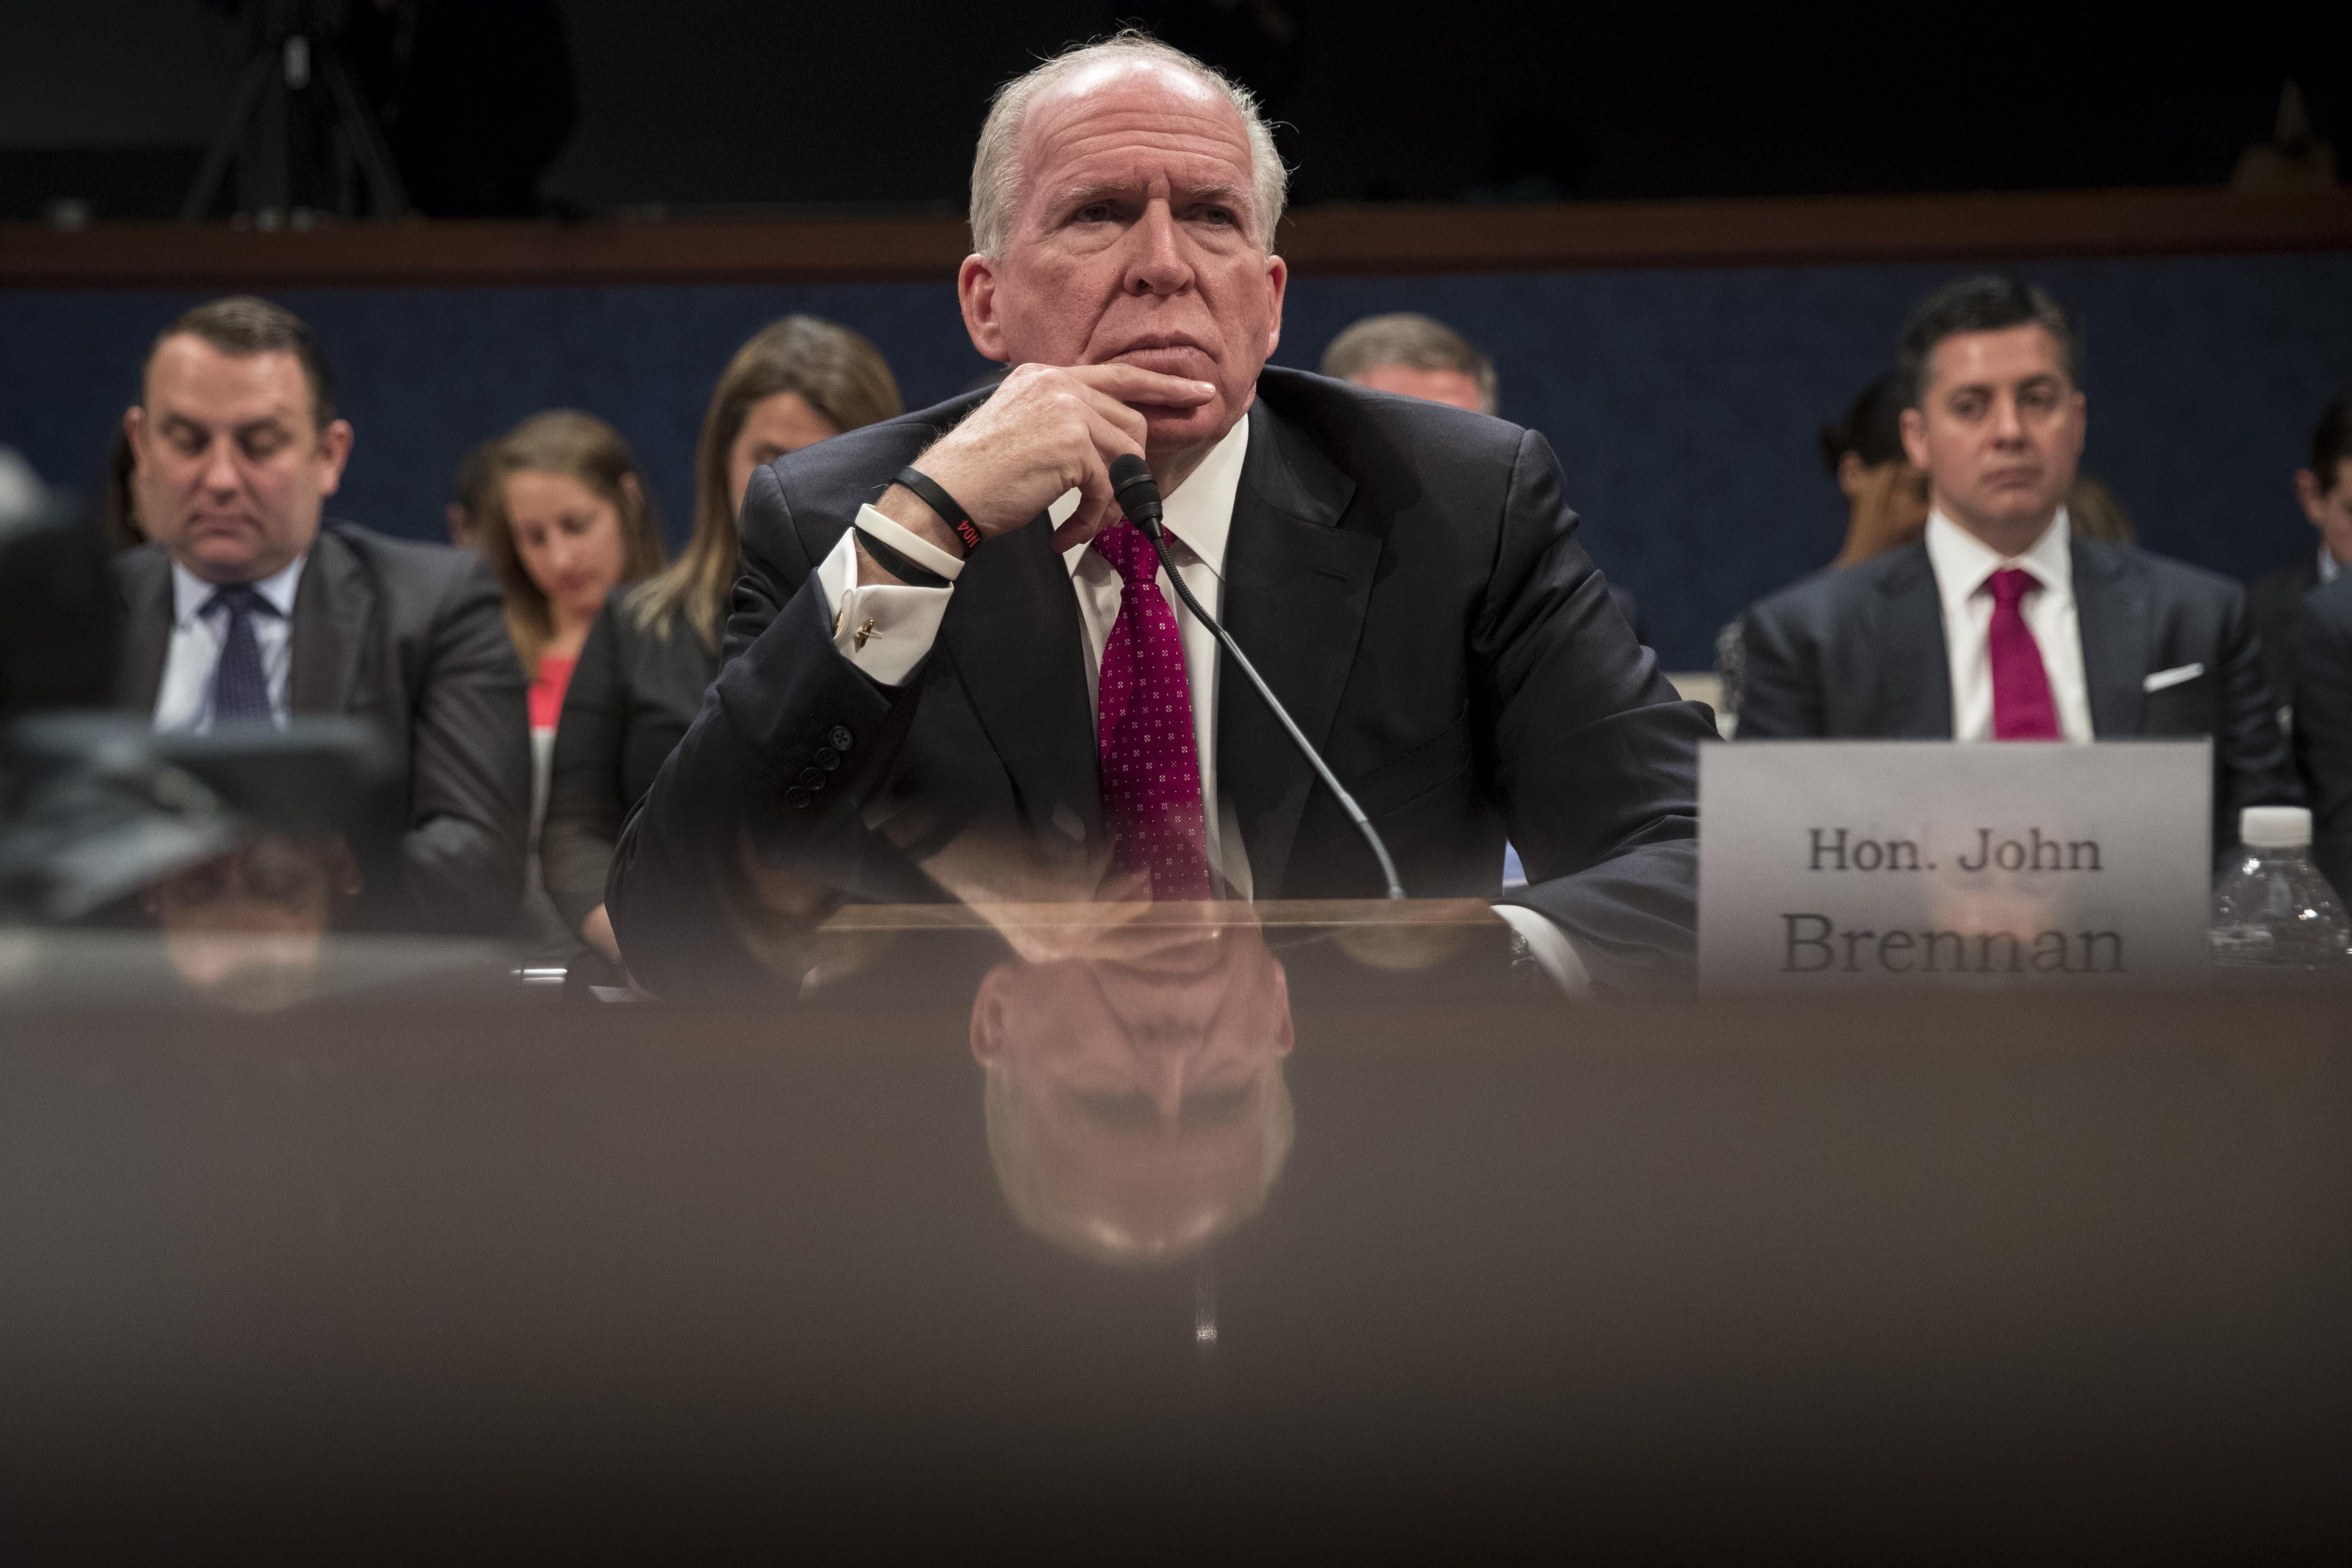 In 2017, the U.S. Central Intelligence Agency (CIA) created a special unit—the Iran Mission Center—to focus attention on the U.S. plans against Iran. The initiative for this unit came from CIA director John Brennan, who left his post as the Trump administration came into office. (Photo by Drew Angerer/Getty Images)